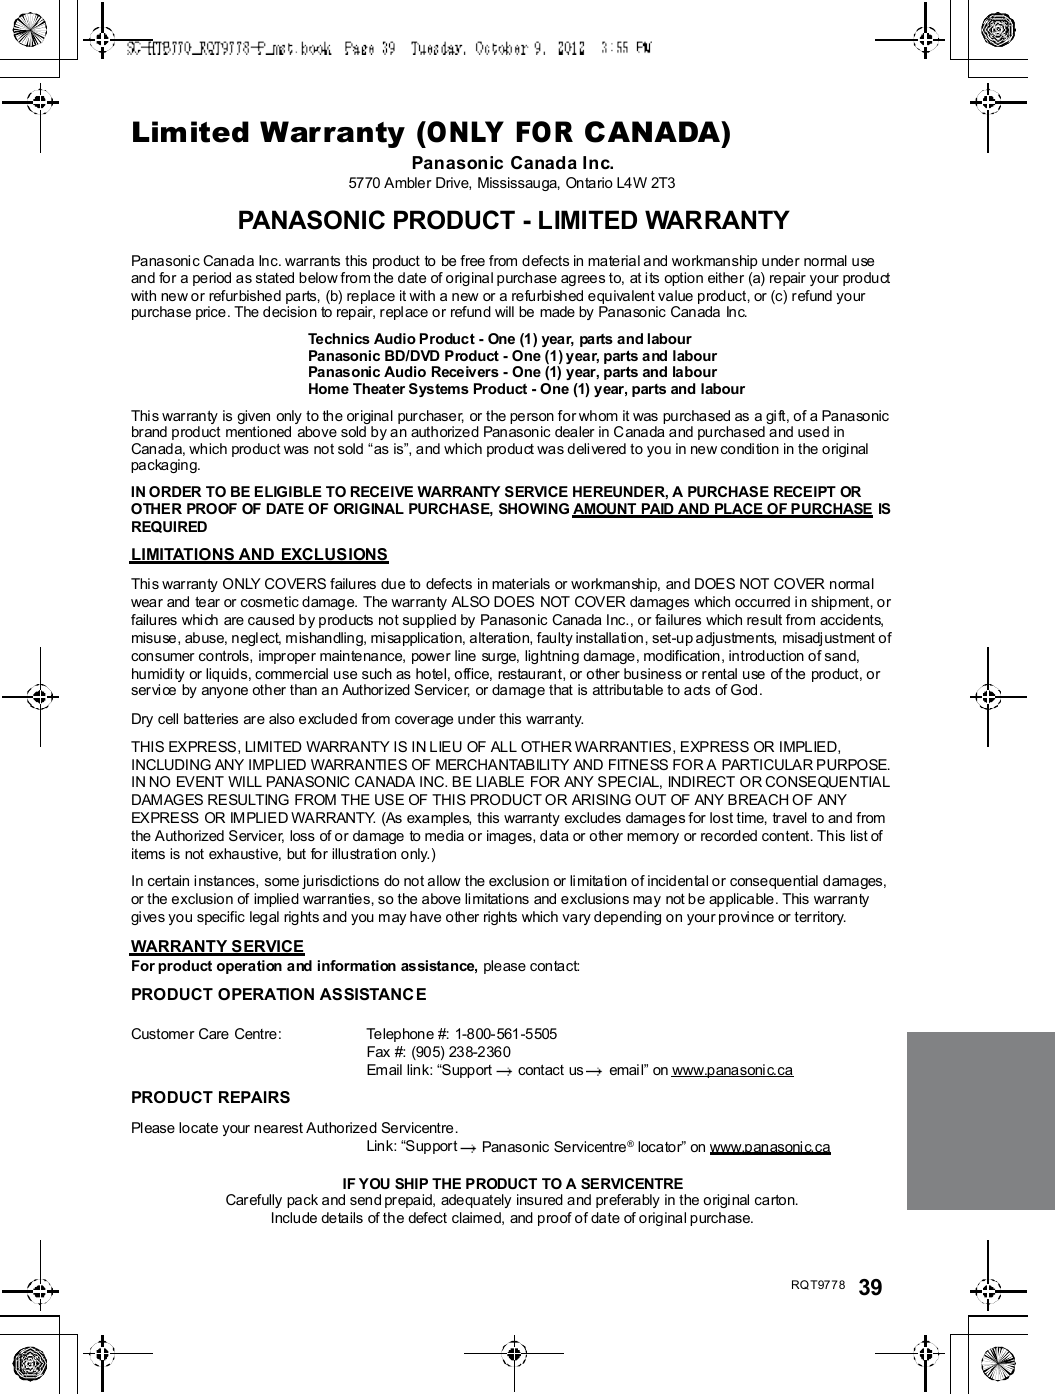 RQT9778 39Limited Warranty (ONLY FOR CANADA)Panasonic Canada Inc.5770 Ambler Drive, Mississauga, Ontario L4 W 2T3PANASONIC PRODUCT - LIMITED WARRANTYPana soni c Canad a Inc. war rants this pro duct  to  be free from defects in material a nd workmanship unde r normal useand for a period as stated below fro m the date of original purch ase agrees to,  at i ts option either (a) repair your produ ctwith new or refurbishe d parts, (b) replace it with a new or a re furbi shed equ ivalent value p roduct, or (c) r efund yourpurchase price. The decision to repair, r eplace o r refund will be made by Pana sonic Can ada  Inc.Technics Audio Product - One (1) year, parts and labourPanasonic BD/DVD Product - One (1) year, parts and labourPanasonic Audio Receivers - One (1) year, parts and labourHome Theat er S ys tems Product - One (1) year, parts and labourThis war ranty is given  only to the or igina l pur chaser, or the person for wh om it was purcha sed as a gi ft, of a Panasonicbr and prod uct  mentio ned  above sold by an authorized Panasonic dealer in C anada and pu rchased a nd use d inCan ad a, which pro du ct was no t sold as is, and which pro du ct was delive red to yo u in new condi tion in the origi nalpackaging.IN ORDER TO BE ELIGIBLE TO RECEIVE WARRANTY SERVICE HEREUNDER, A PURCHASE RECEIPT OROTHER PROOF OF DATE OF ORIGINAL PURCHASE, SHOWING AMOUNT PAID AND PLACE OF PURCHASE ISREQUIREDLIMITATIONS AND EXCLUSIONSThis war ranty ONLY COVERS failures du e to defects in mater ials or workmansh ip, and DOES NOT COVER normalwea r and  te ar or cosmetic damage. The warran ty ALSO DOES NOT COVER damages which occu rred i n shipment, orfailures whi ch are caused b y products not supplied by Panasonic Canada I nc., or failur es which result from accidents,misuse, abuse, negl ect, m ishandling, mi sapplicatio n, alteration, faulty installati on, set-u p adjustments,  misadj ustment ofconsumer controls, impr ope r maintenance, power line  surge, lightning damage , modification, introd uction of sand,humidi ty or liquids, commercial use such as hotel, office,  restauran t, or other busine ss or rental u se  of the  product, orservice by anyone other than a n Authorized Servicer, or damag e that is attributable to acts of God.Dry cell batteries ar e also excluded fr om coverage u nder this warr anty.THIS EXPRESS, LIMITED WARRANTY IS IN LIEU OF ALL OTHER WARRANTIES, EXPRESS OR IMPLIED,INCLUDING ANY IMPLIED WARRANTIES OF MERCHANTABILITY AND FITNESS FOR A PARTICULAR PURPOSE.IN NO EVENT WILL PANASONIC CANADA INC. BE LIABLE FOR ANY SPECIAL, INDIRECT OR CONSEQUENTIALDAMAGES RESULTING FROM THE USE OF THIS PRODUCT OR ARISING OUT OF ANY BREACH OF ANYEXPRESS OR IMPLIED WARRANTY. (As examples, this warranty excludes damages for lost time, travel to and fromthe Authorized Servicer, loss of or damage to media or images, data or other mem ory or re corded content. This list ofitems is not exhaustive, but for illustration only.)In certain i nstances, some jurisdictions do not a llow the exclusion or li mitati on of incidental or conseque ntial damages,or the exclusio n of implied war rantie s, so the a bove li mitations and exclusions ma y not b e applicable . This warran tygi ves you specific legal rights a nd you m ay h ave other rights which vary d ep end ing on your provi nce or ter ritory.WARRANTY SERVICEFor product operation and information assistance, please contact:PRODUCT OPERATION ASSISTANCECustomer Care  Centre : Telephone #: 1-8 00- 561-5505Fax #: (90 5) 238-2360Email link: Supp ort  contact us  emai l on www.p anasoni c.caPRODUCT REPAIRSPl ease lo cate your n ea rest Authorized Servicentre .Lin k: Sup por t  Panasonic Servicentre ® loca tor on www.pan asoni c.caIF YOU SHIP THE PRODUCT TO A SERVICENTRECar efully pa ck and sen d pr epa id, adequately insured and pr efera bly in the origi nal carton.Inclu de details of th e defect  claime d,  and p roof o f date of o rigina l purchase.